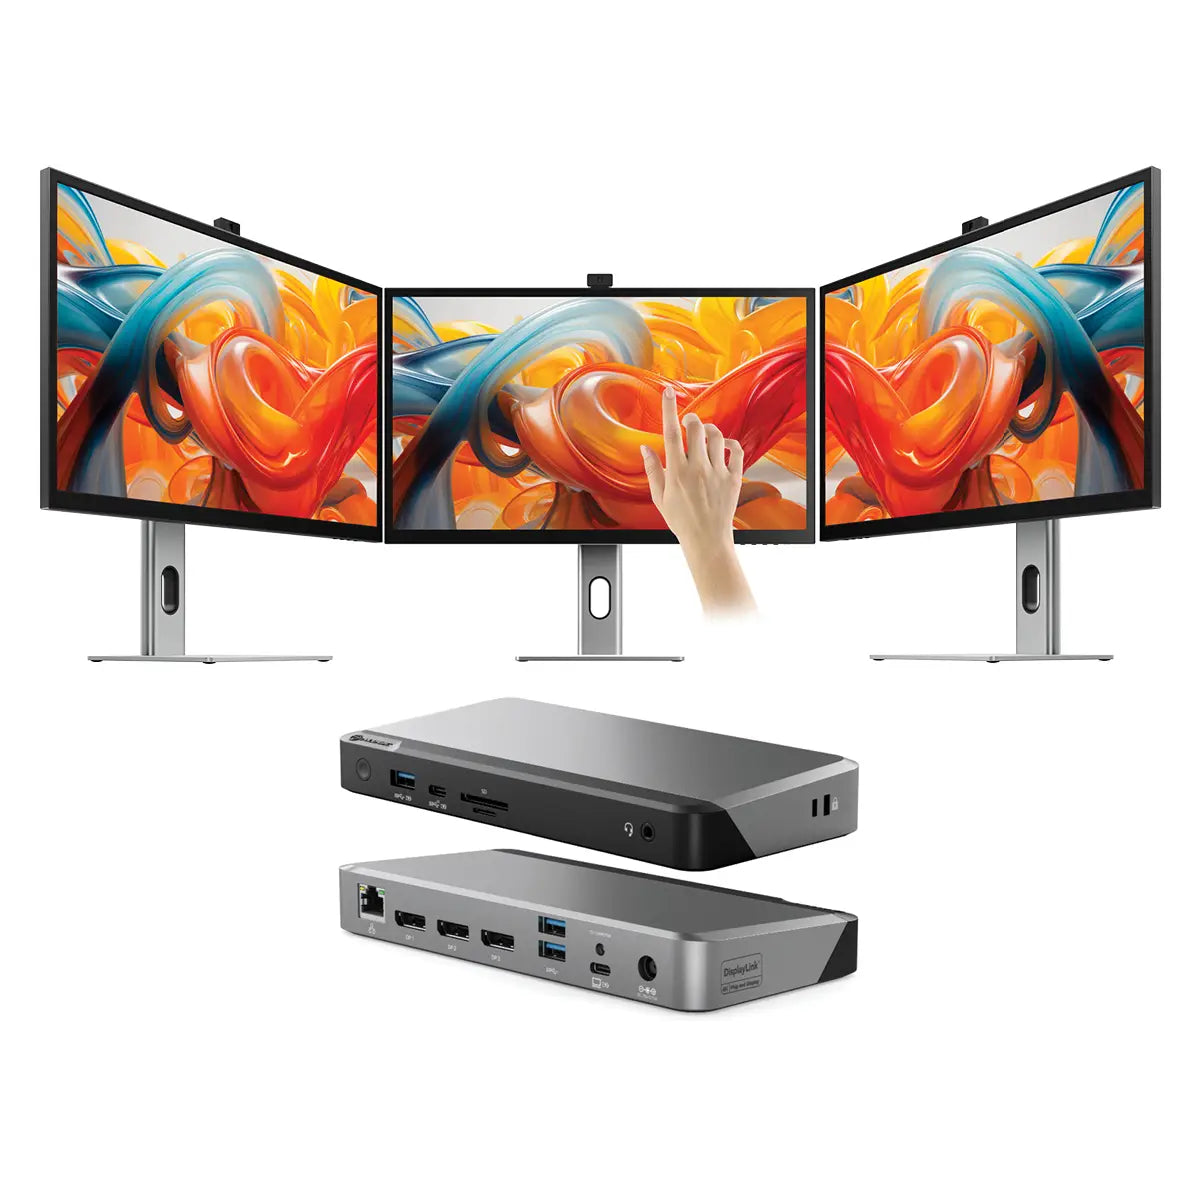 clarity-pro-touch-27-uhd-4k-monitor-with-65w-pd-webcam-and-touchscreen-pack-of-2-dx3-triple-4k-display-universal-docking-station-with-100w-power-delivery1